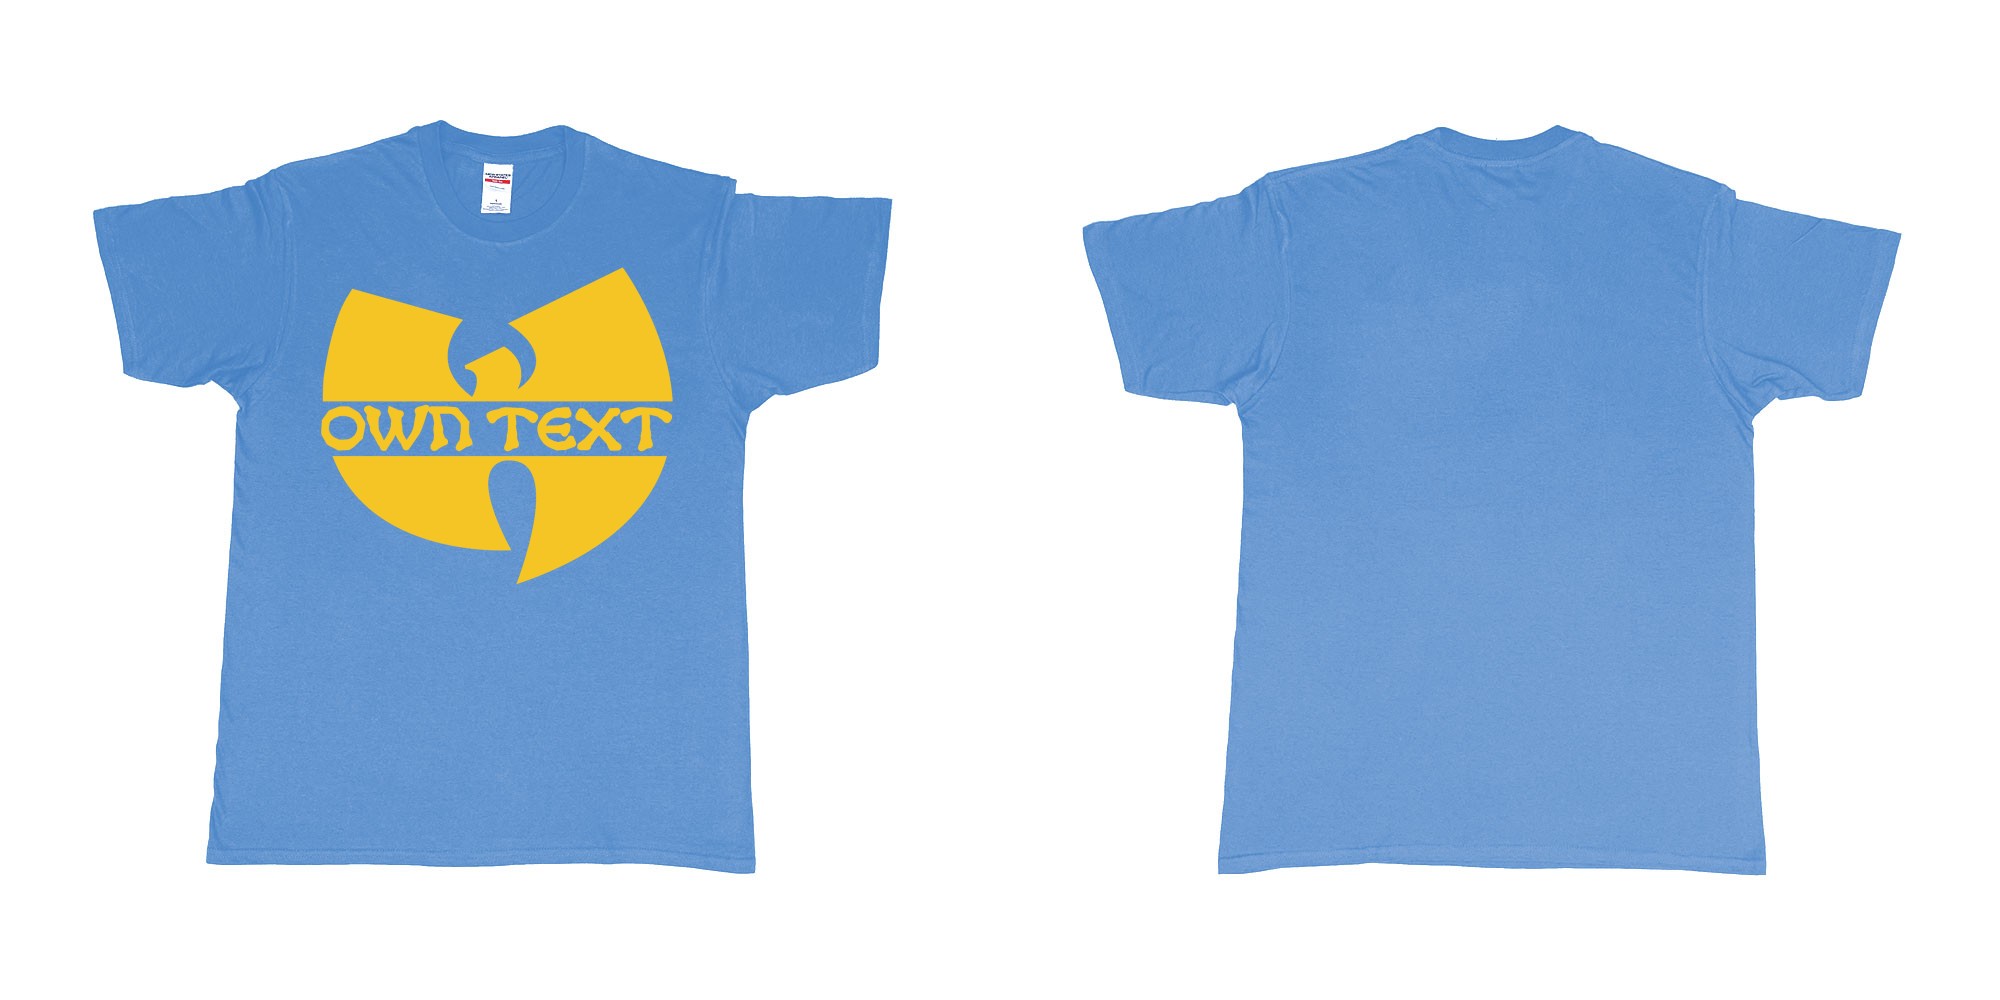 Custom tshirt design wu tang clan logo in fabric color carolina-blue choice your own text made in Bali by The Pirate Way